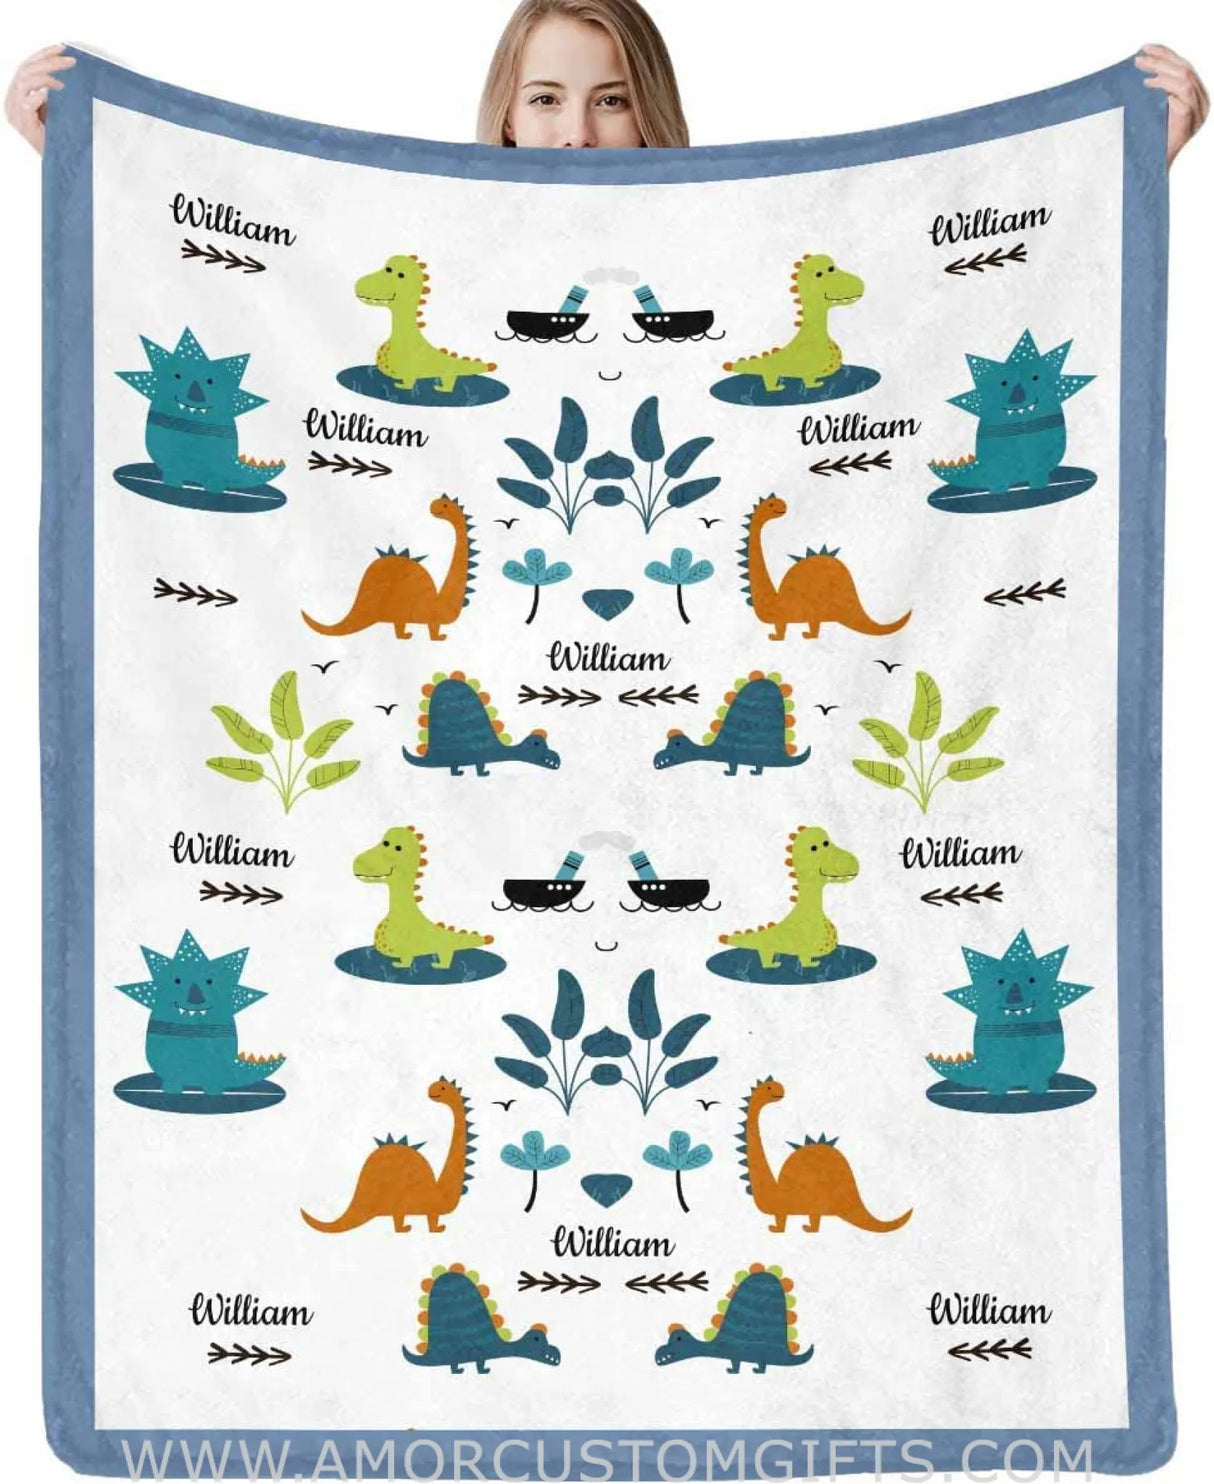 Blankets USA MADE Personalized Dinosaur Baby Blankets Swaddling Unisex with Name Soft Monogrammed Customized Baby Girl Boy Gifts for Newborn Infan